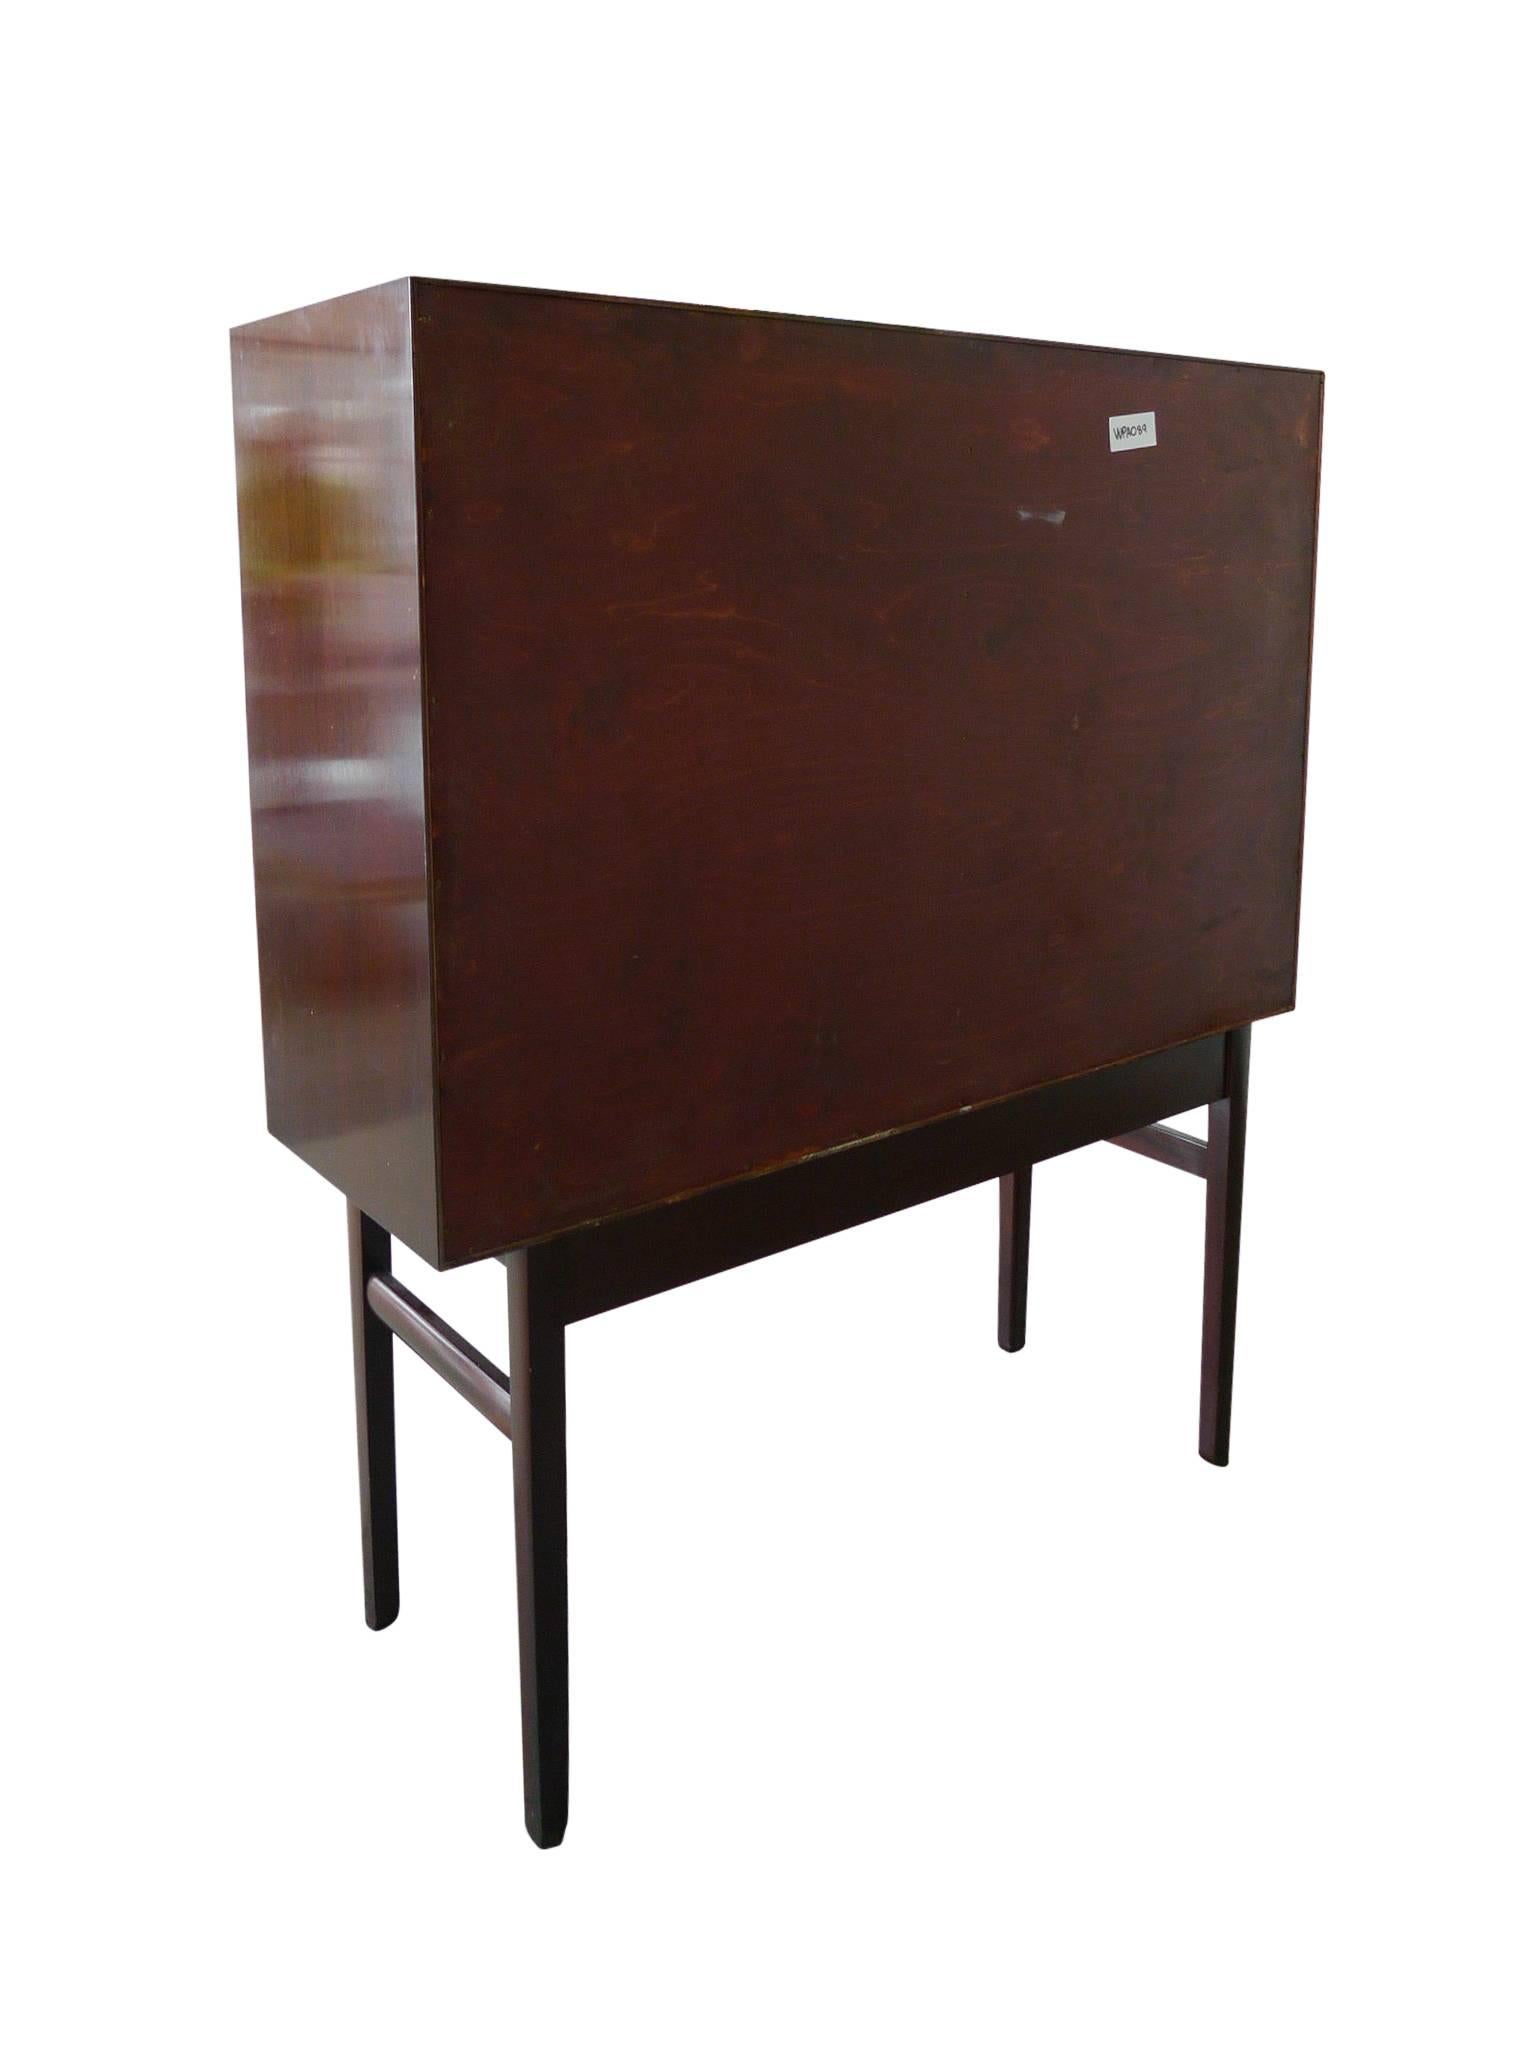 Scandinavian Modern 1960s Danish Rungstedlund Mahogany Highboard by Ole Wanscher for Poul Jeppesen For Sale